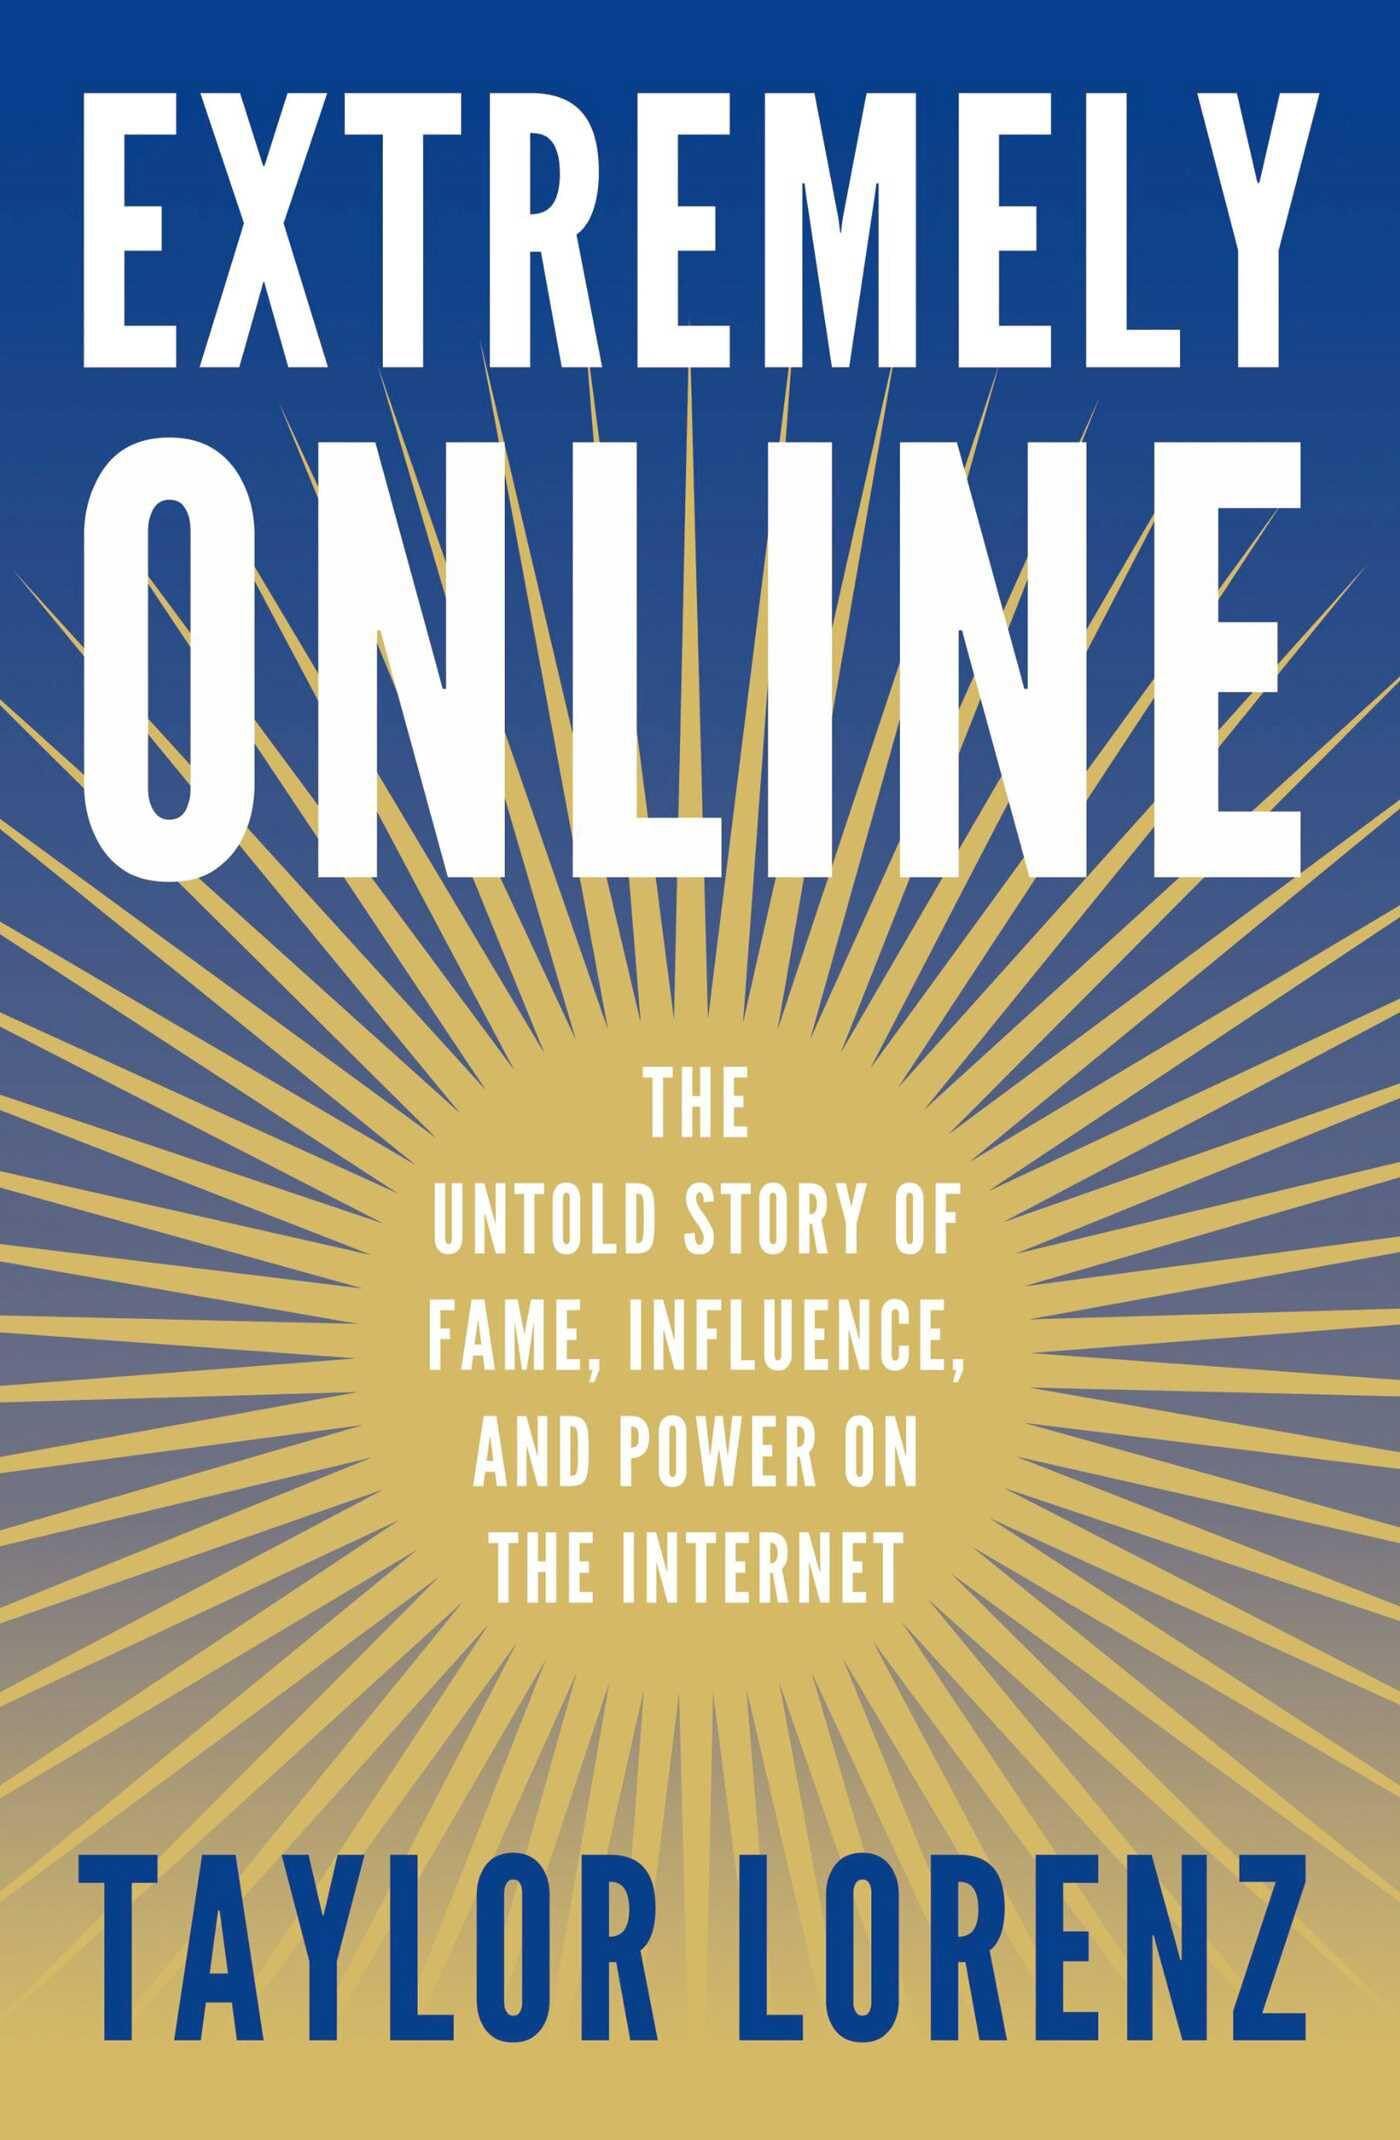 The cover of 'Extremely Online' by Taylor Lorenz.